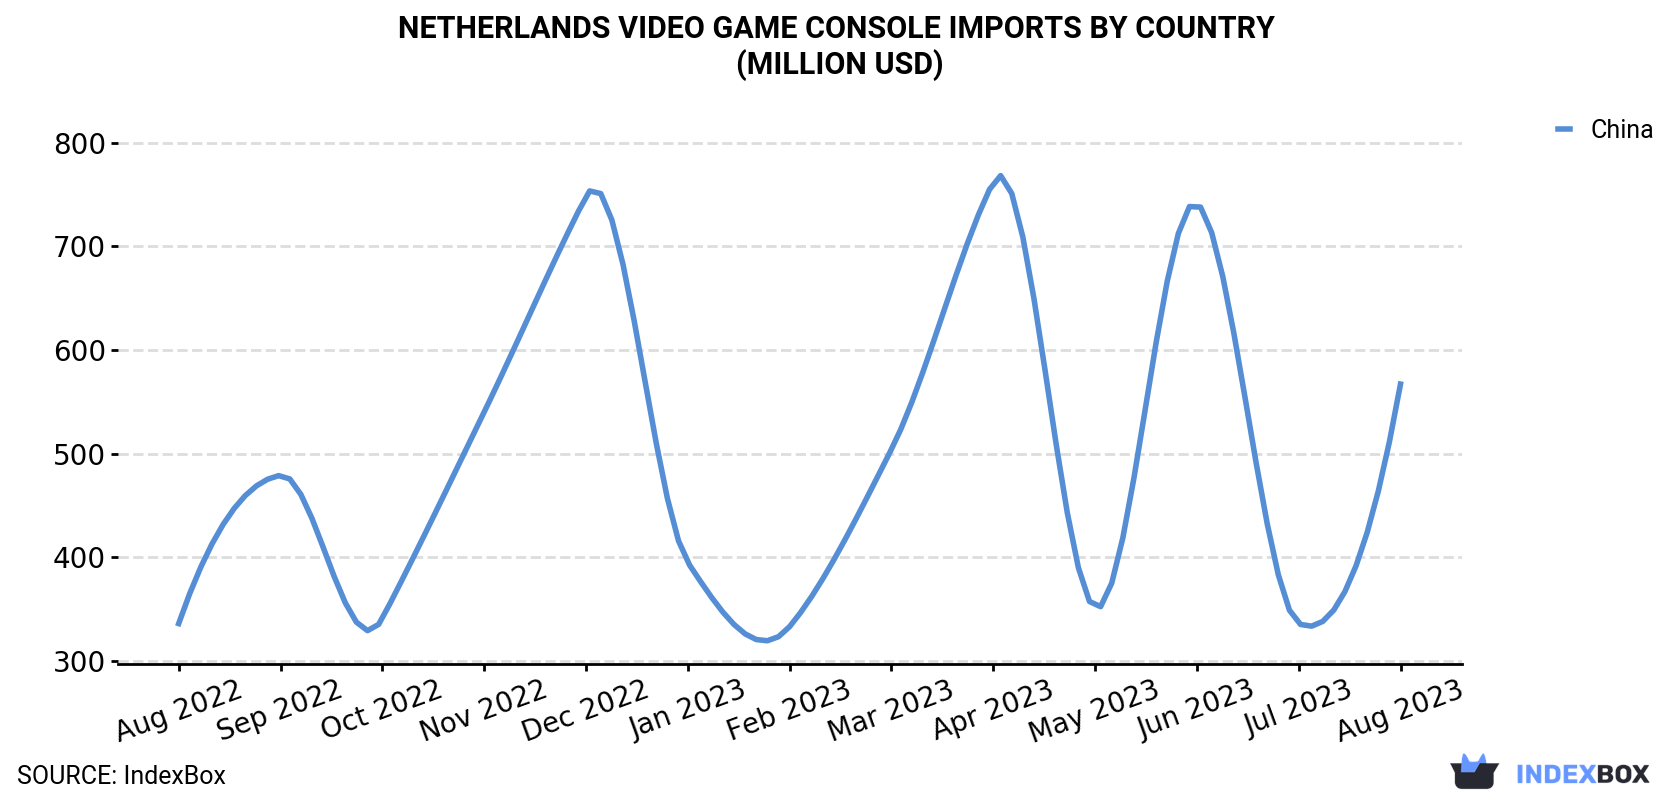 Netherlands Video Game Console Imports By Country (Million USD)